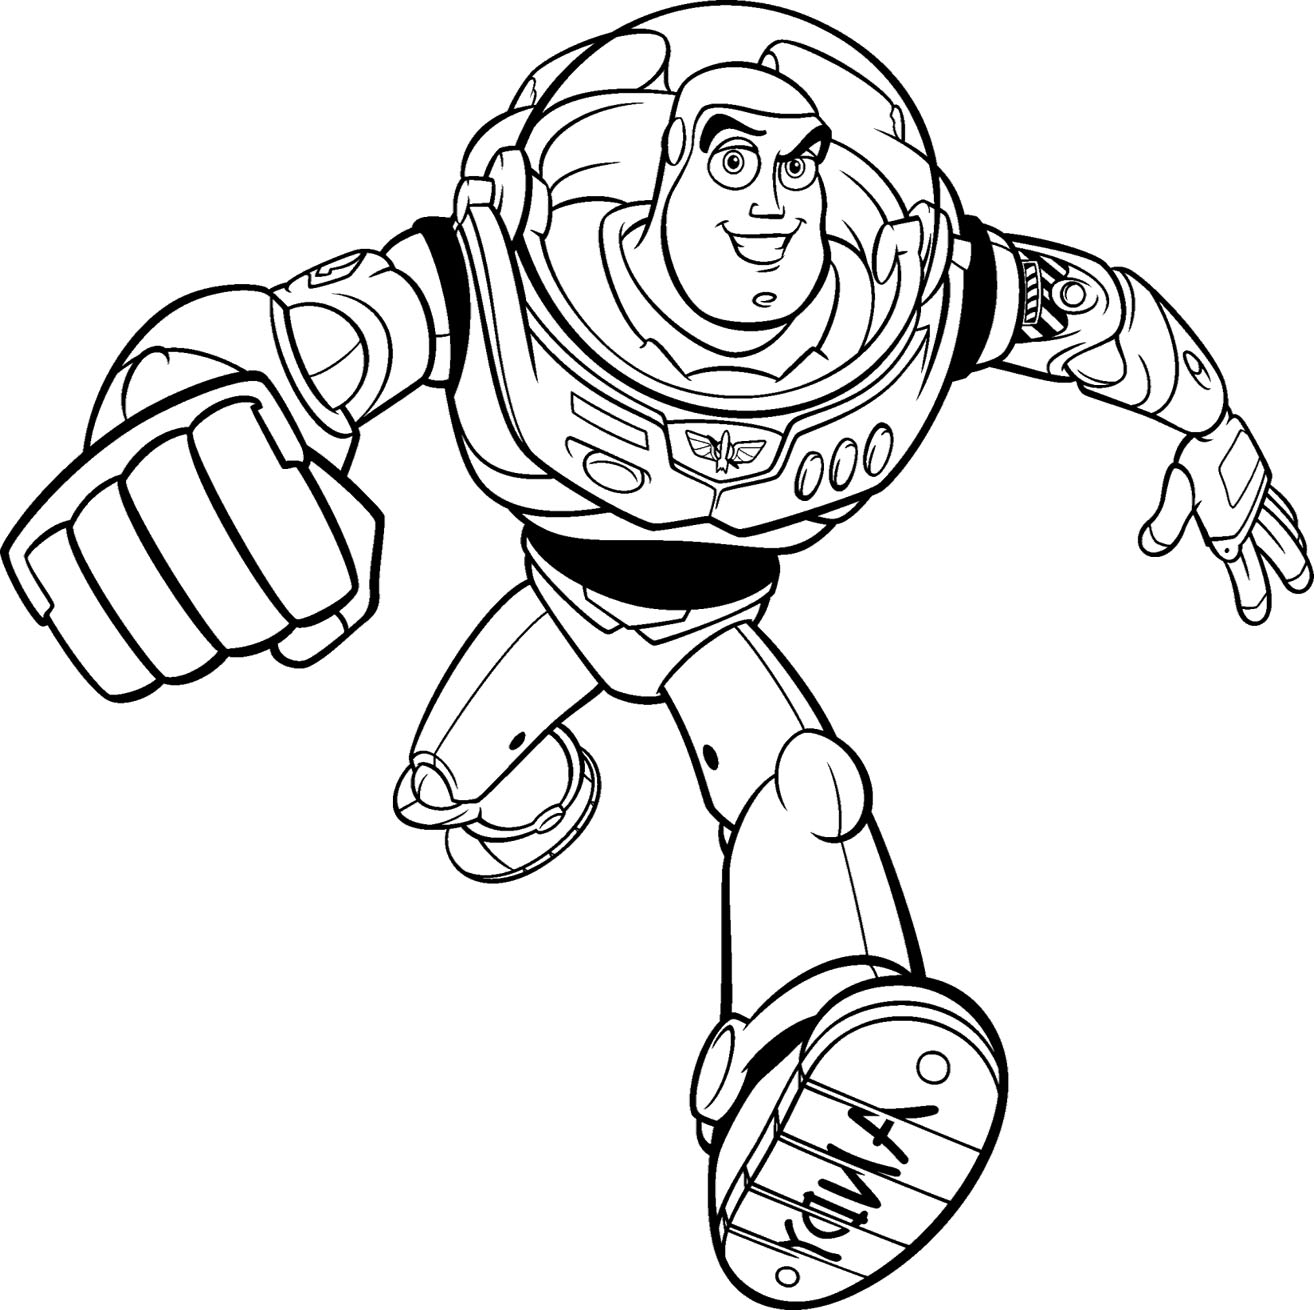 Easier Toy Story Buzz Lightyear Goes Quickly Coloring Pages ...